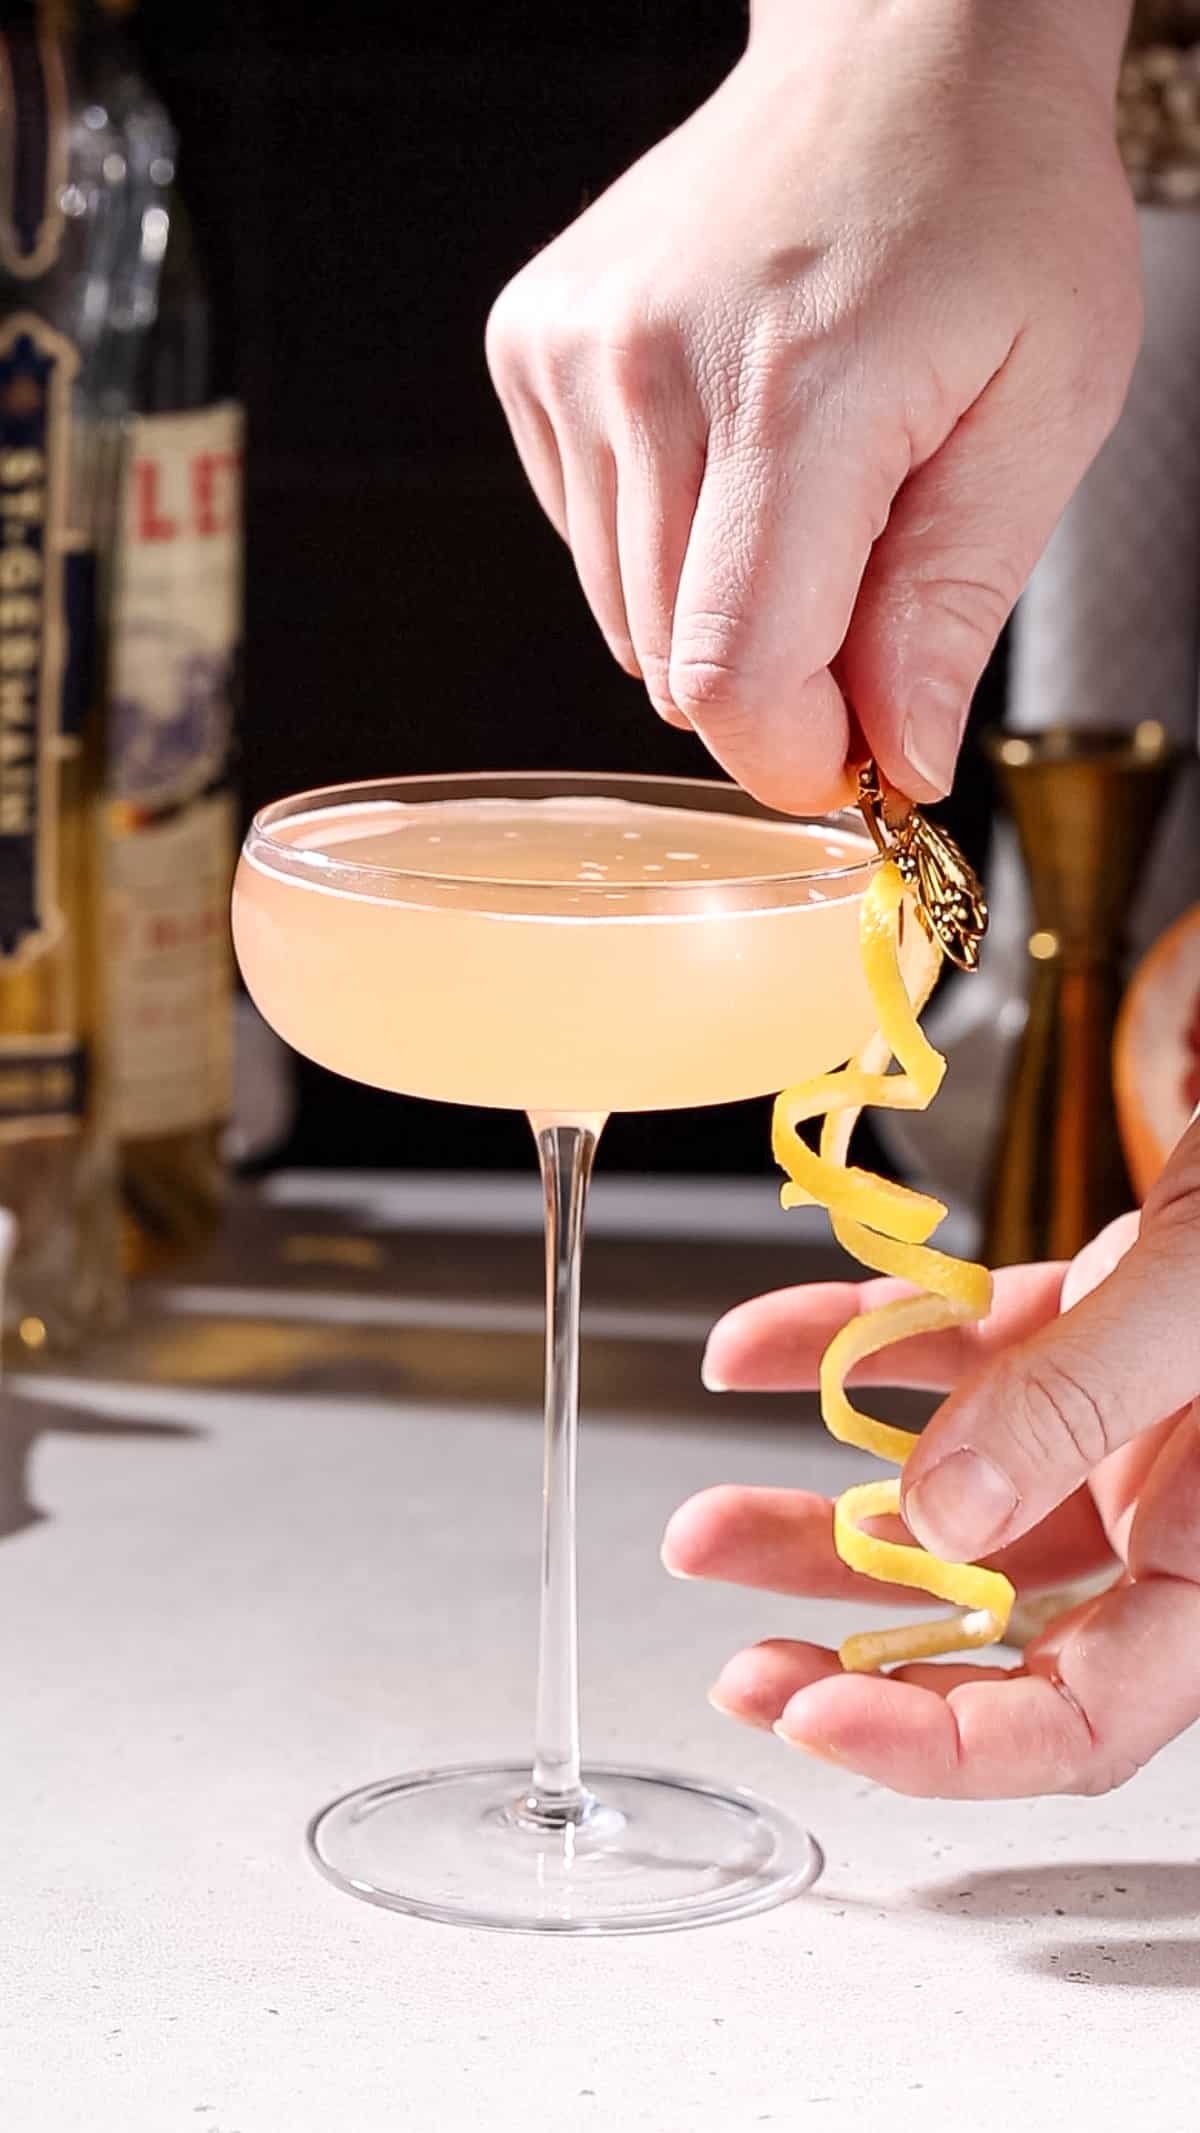 Hand adding a long curly lemon peel garnish to a coupe glass using a clip.